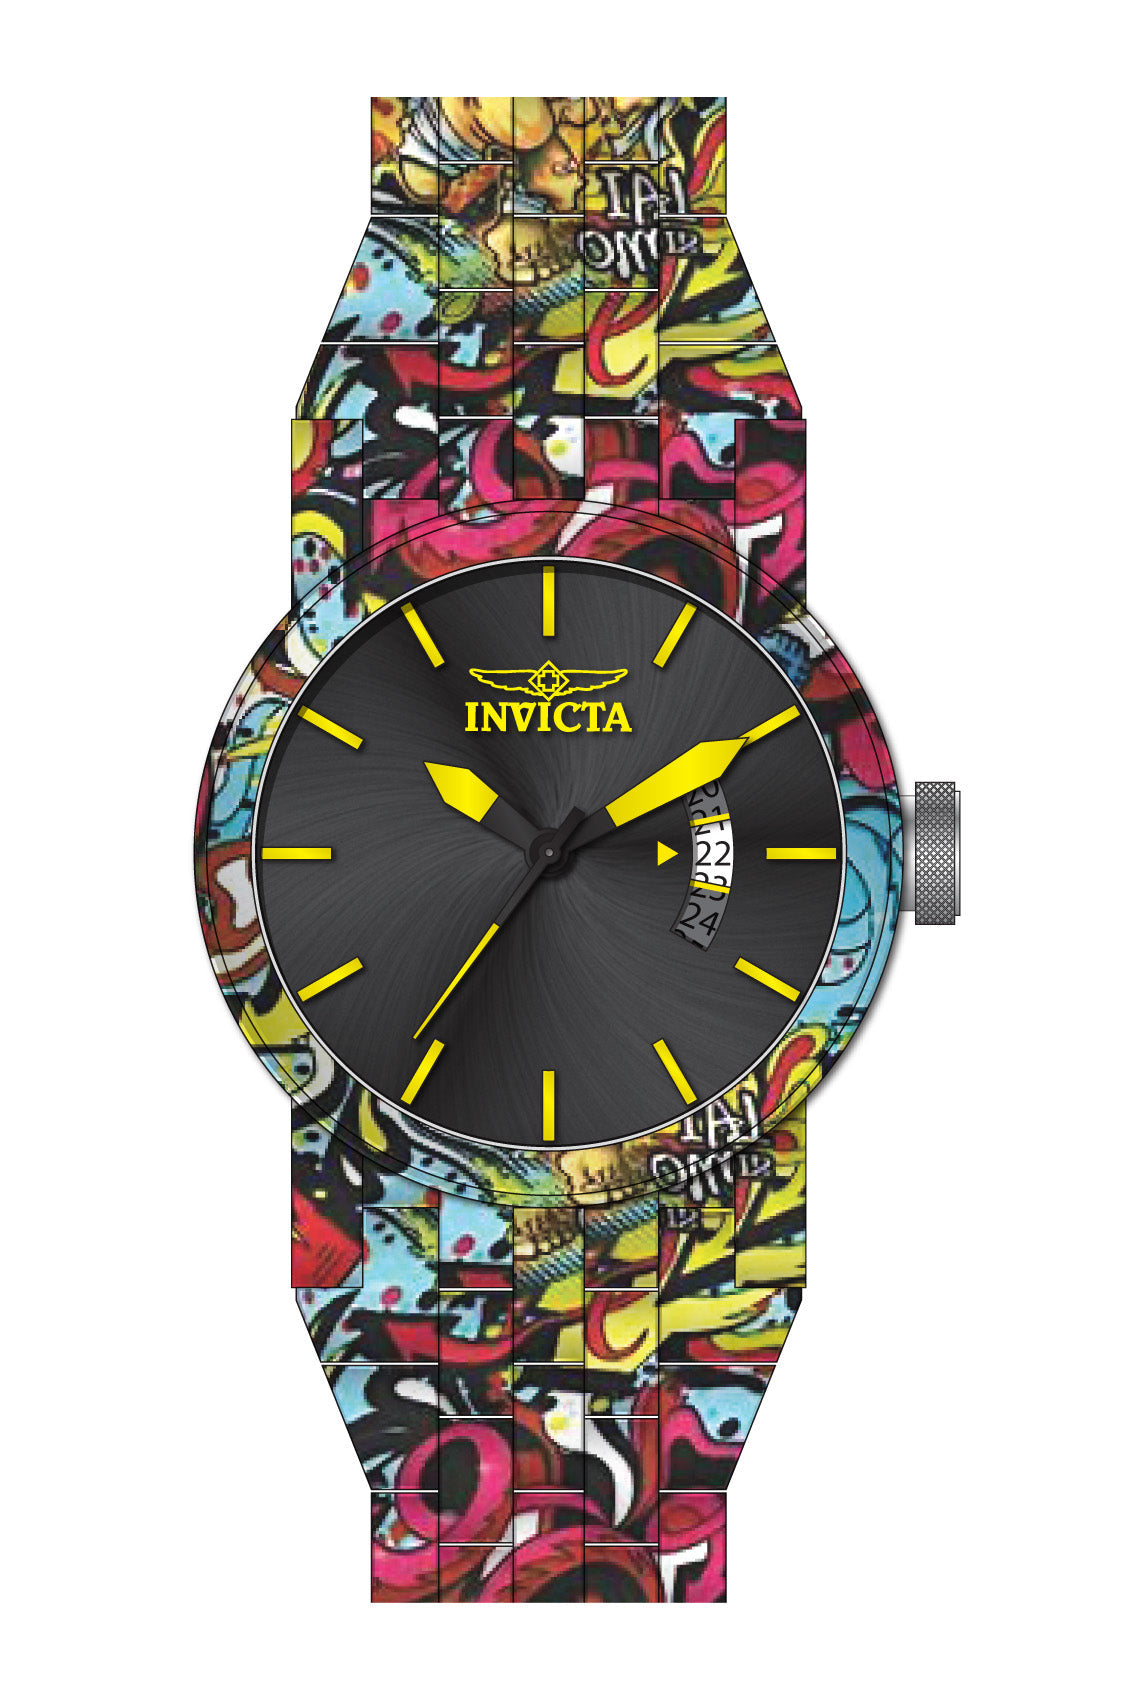 Parts for Invicta DNA Lady 34489